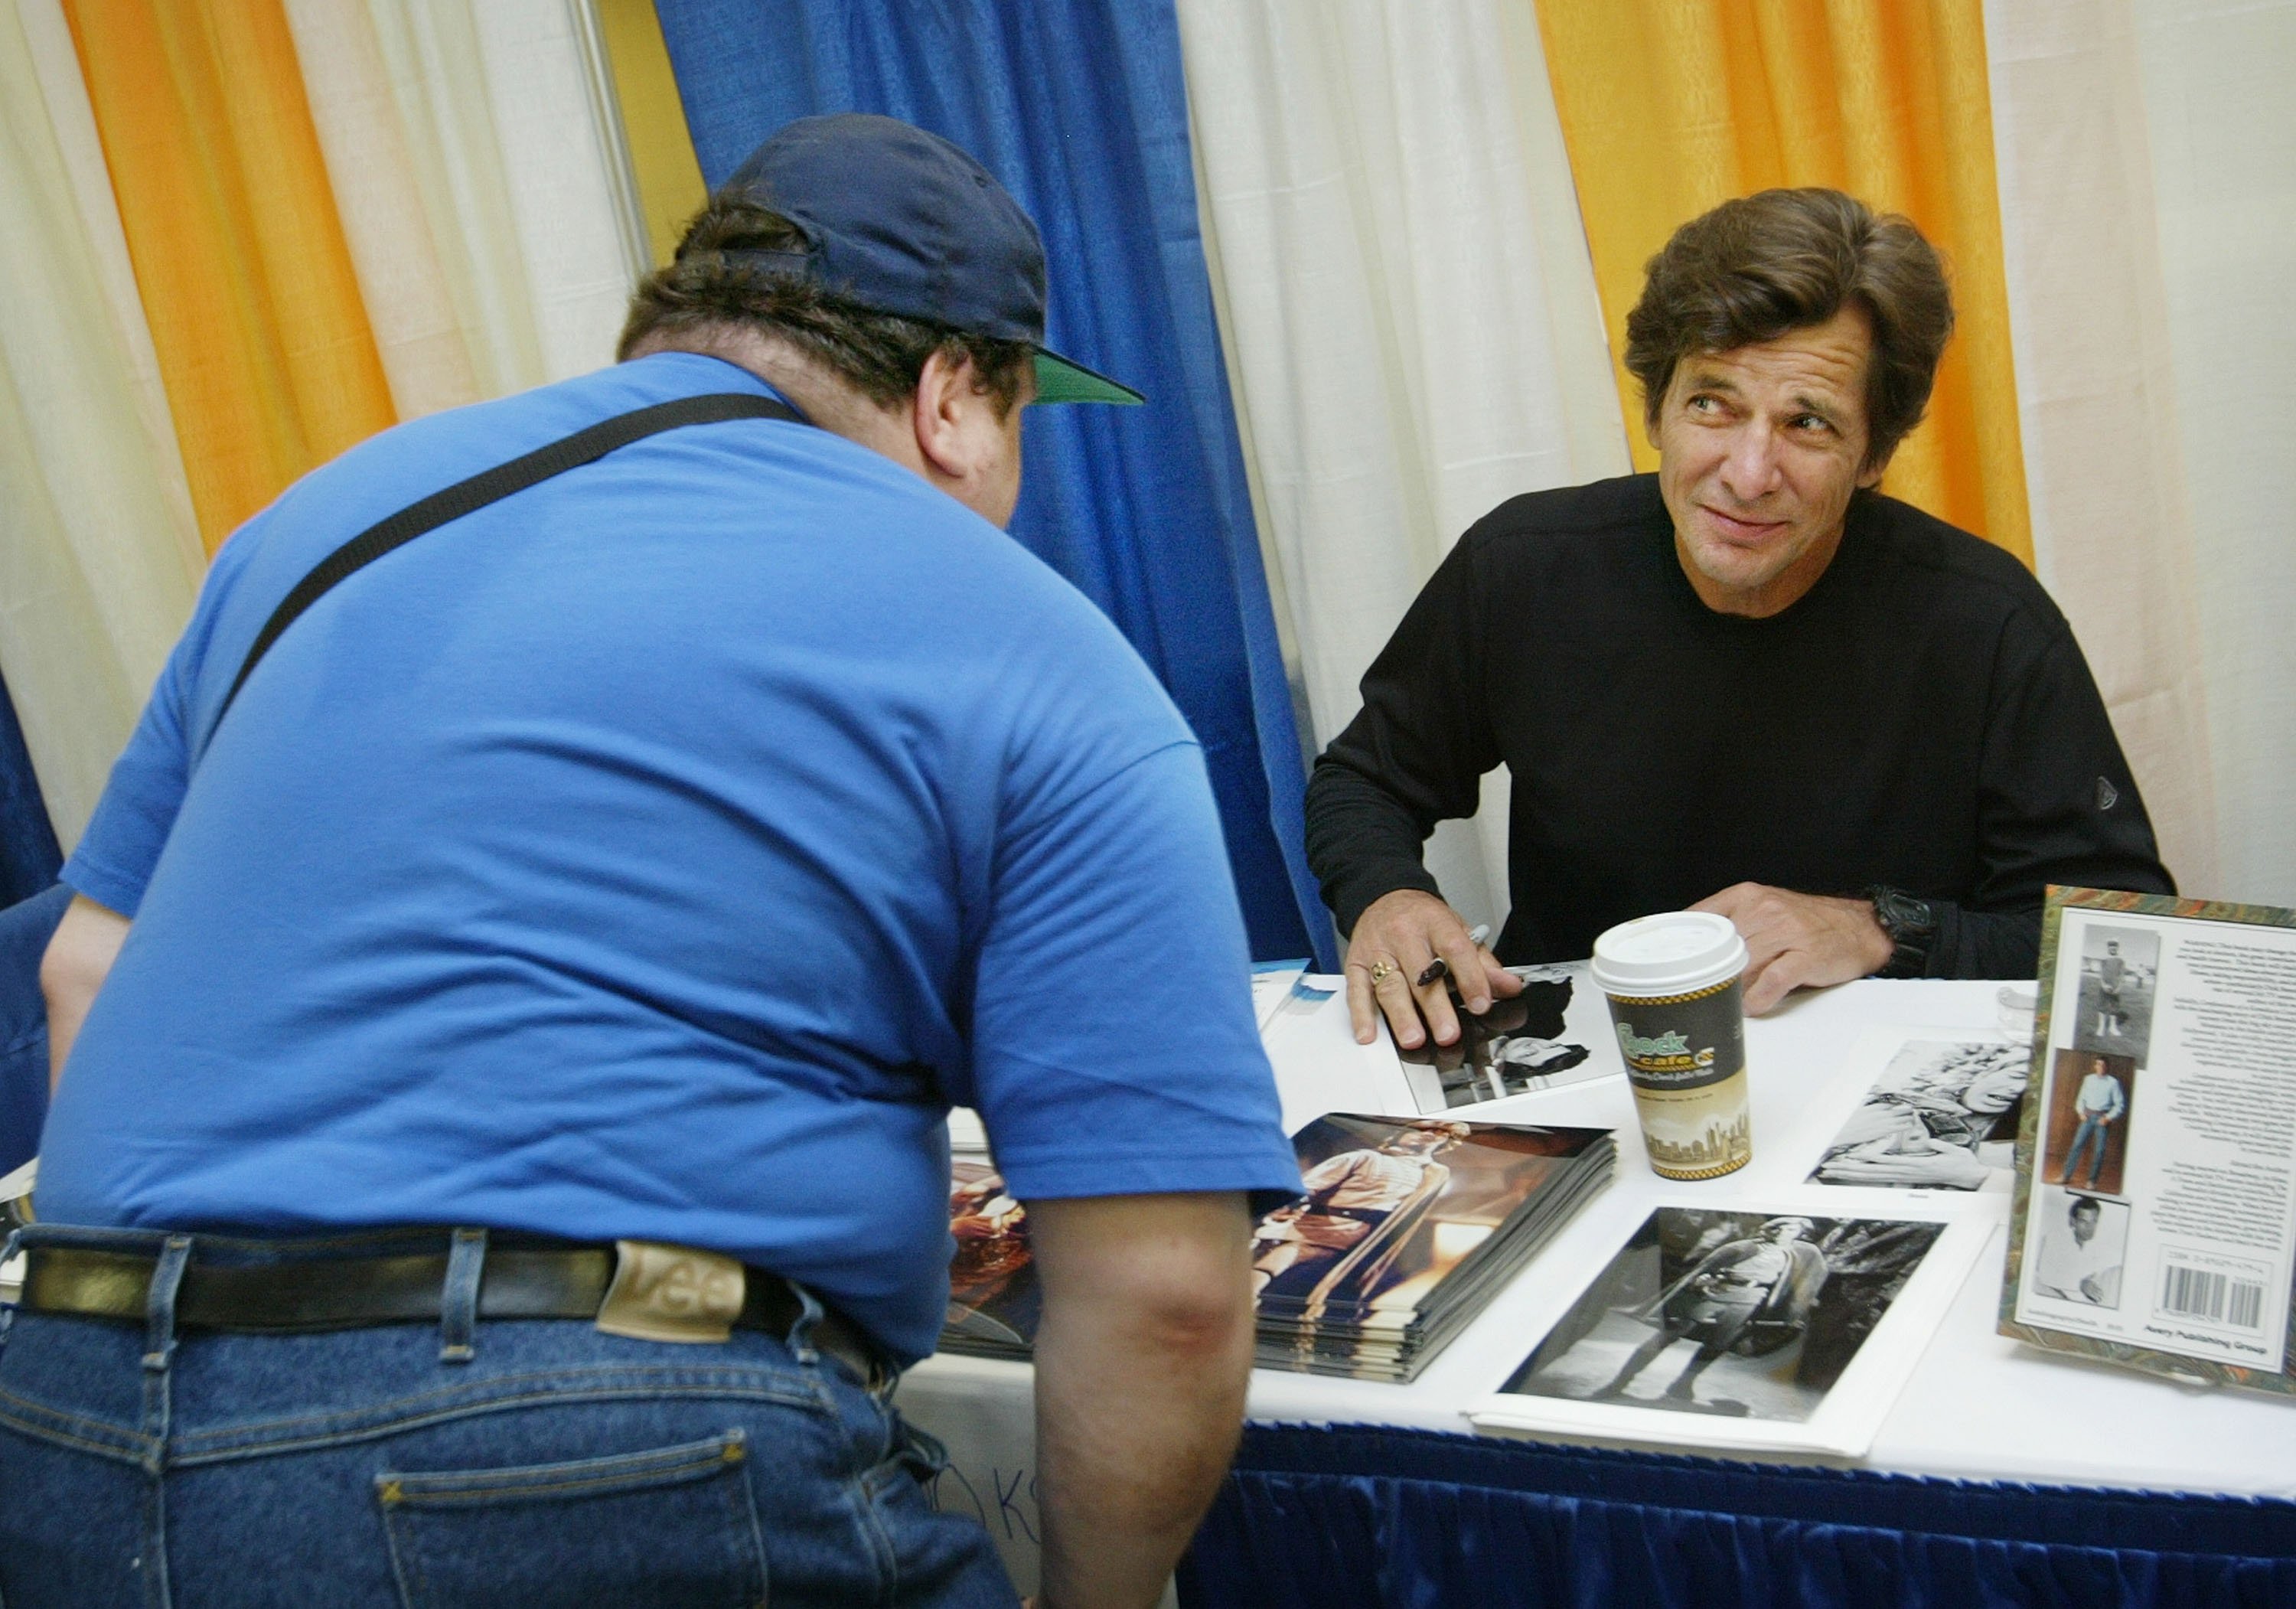 Actor Dirk Benedict, talks to a fan at the Sci-Fi and Fantasy Creators Convention June 27, 2003 | Source: Getty Images